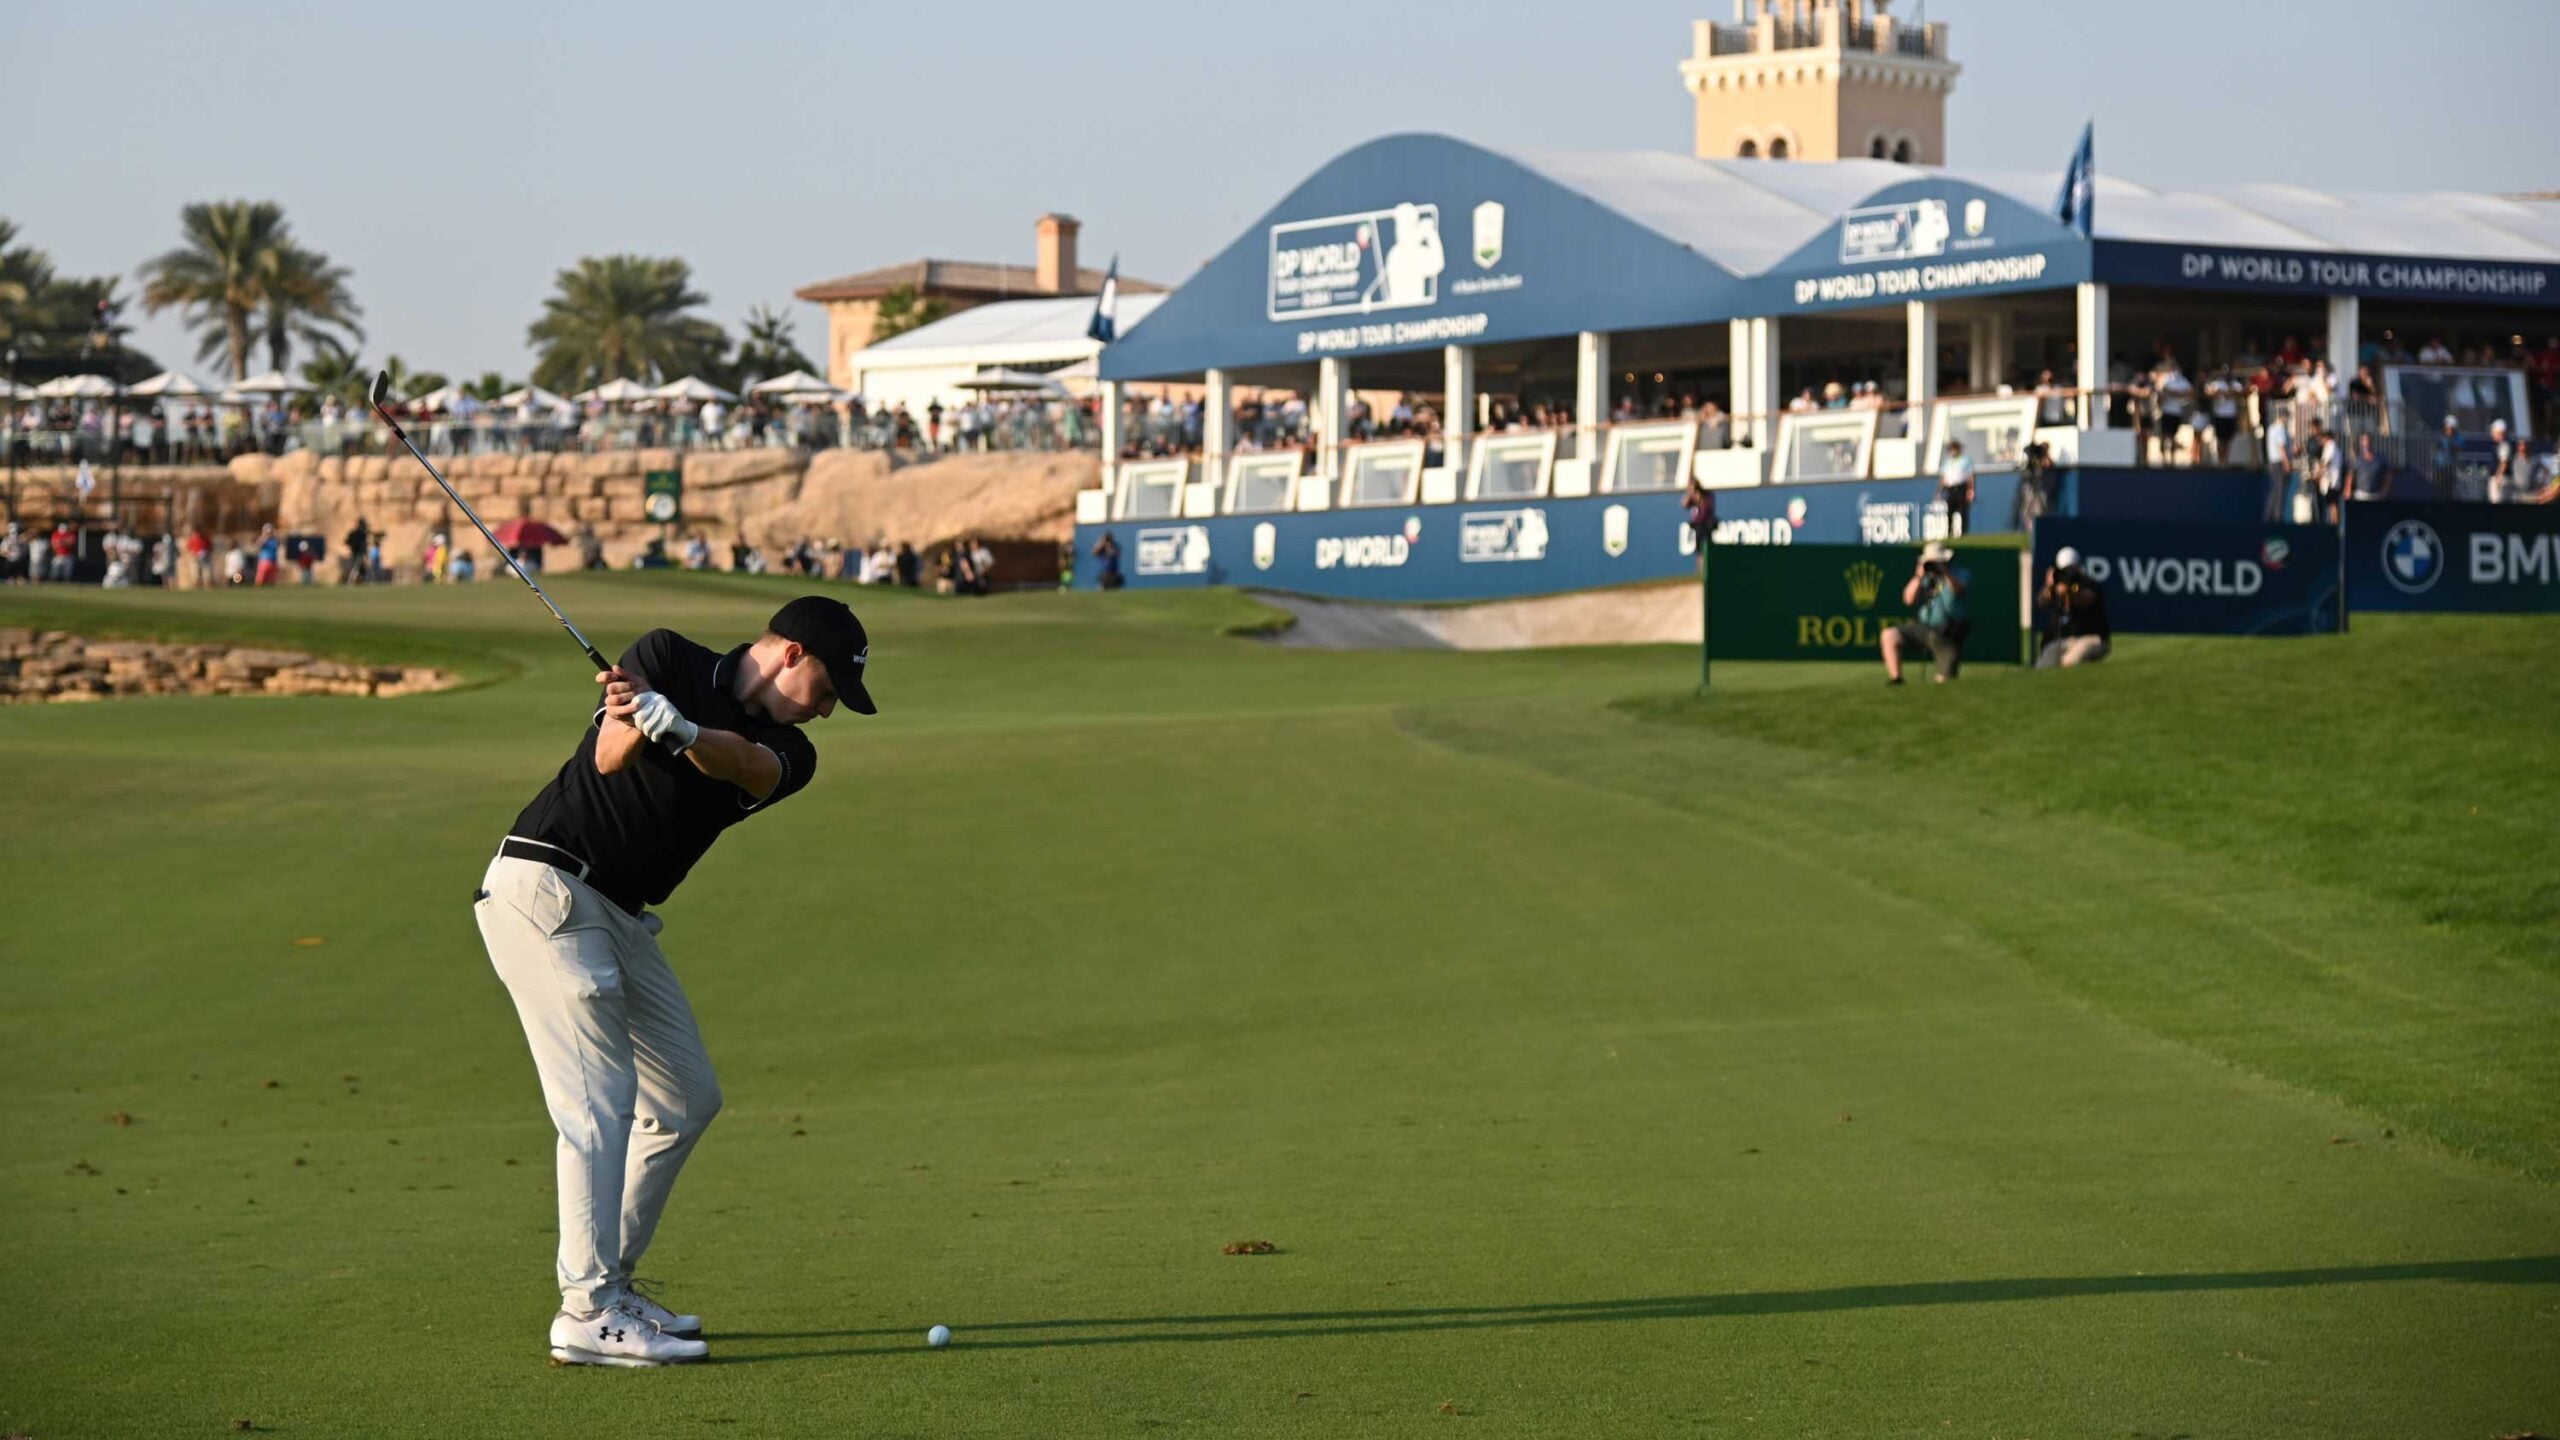 Matthew Fitzpatrick of England plays his third shot on the 18th hole during Day 4 of the DP World Tour Championship at Jumeirah Golf Estates on December 13, 2020 in Dubai, United Arab Emirates.